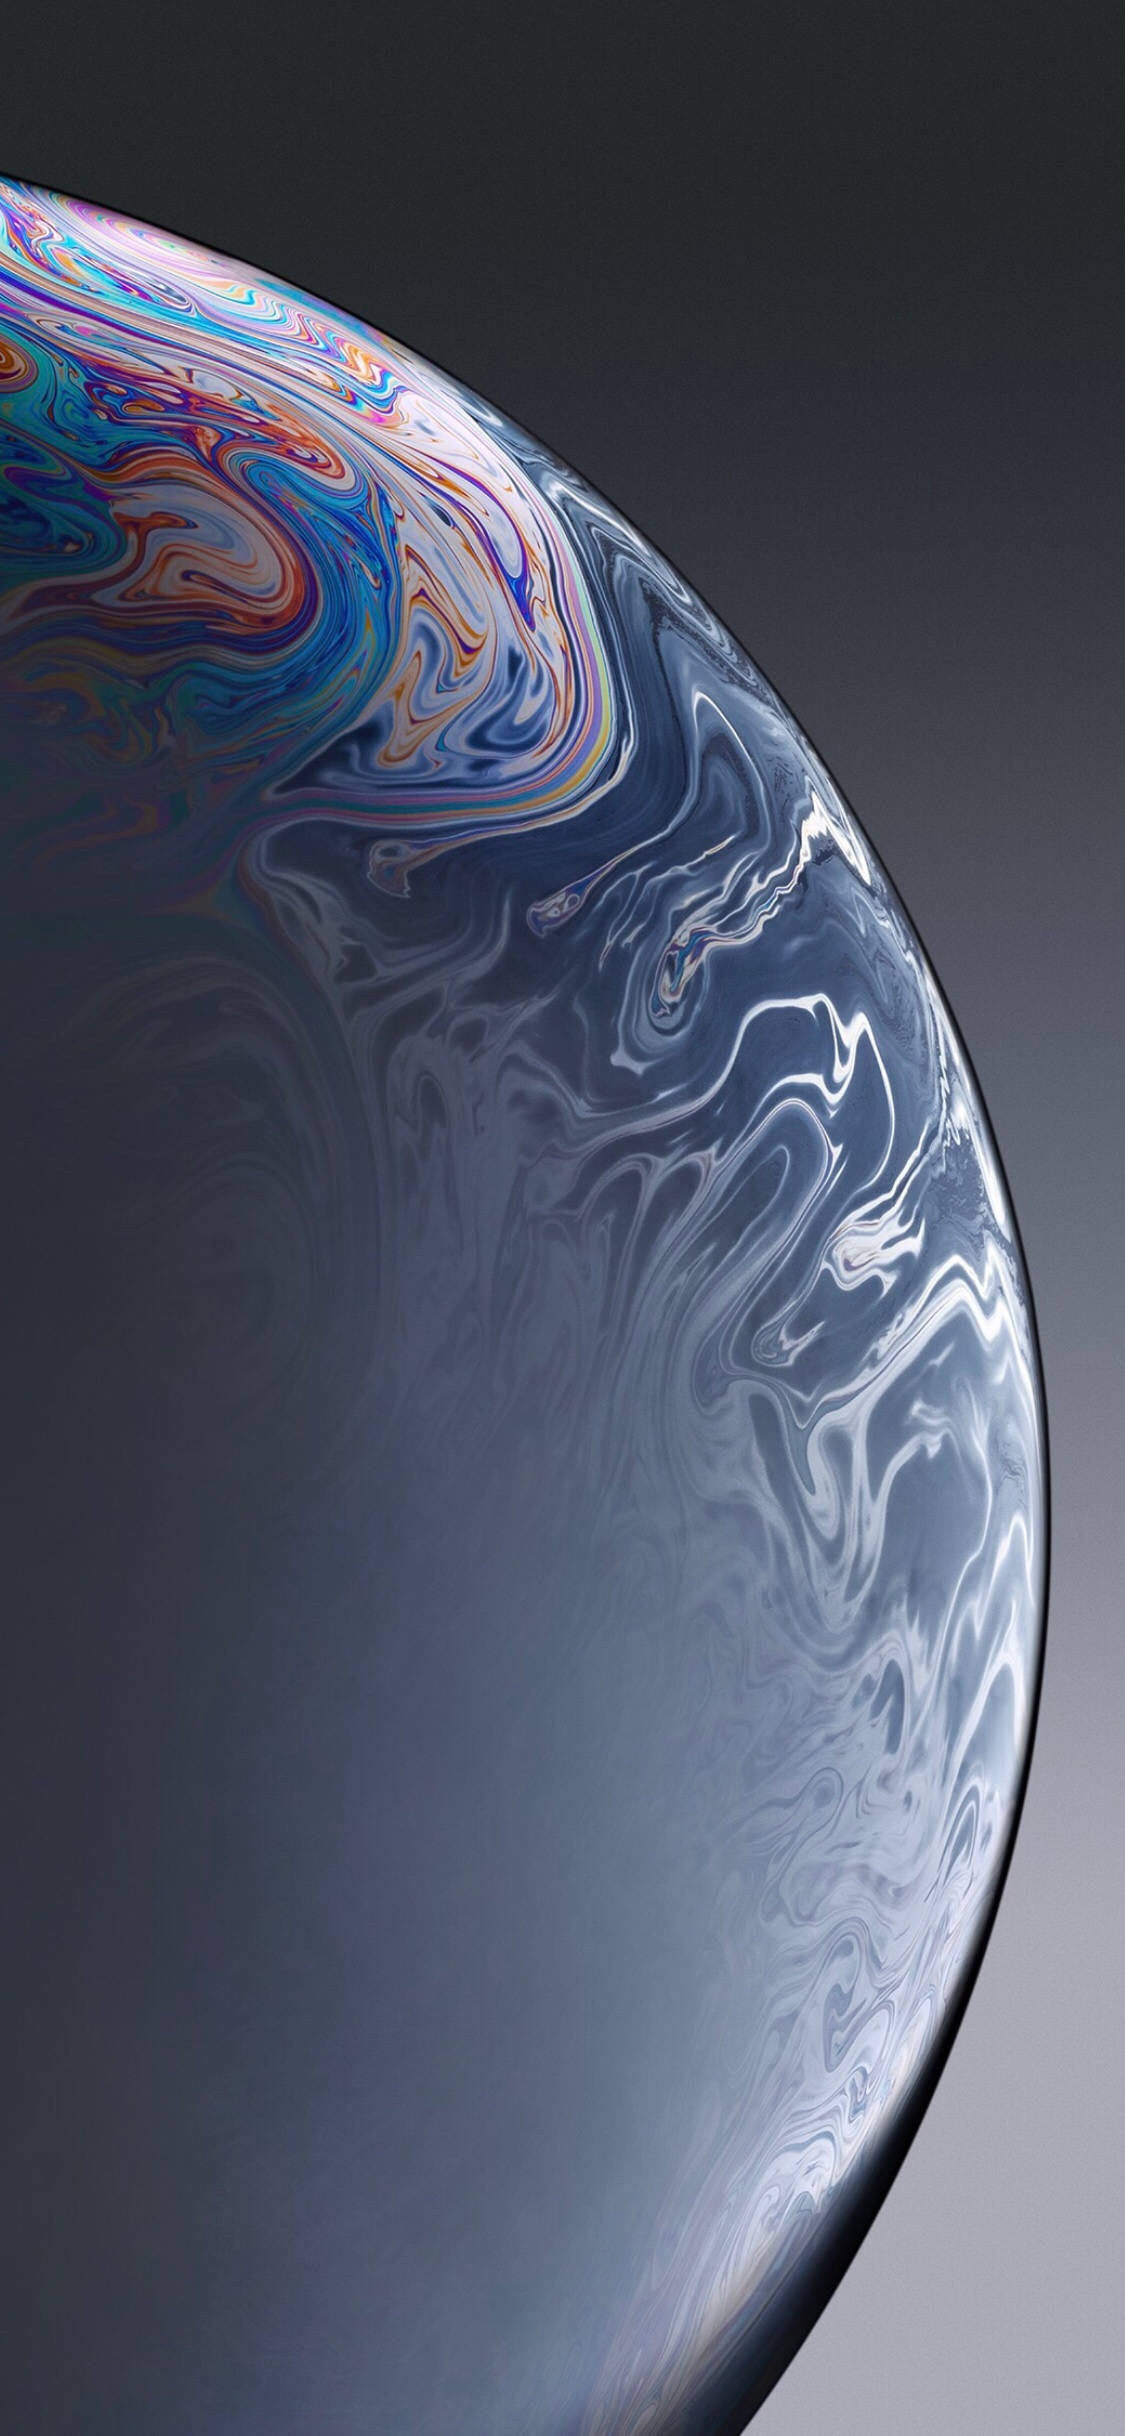 Iphone Xr Gray Half Bubble Background